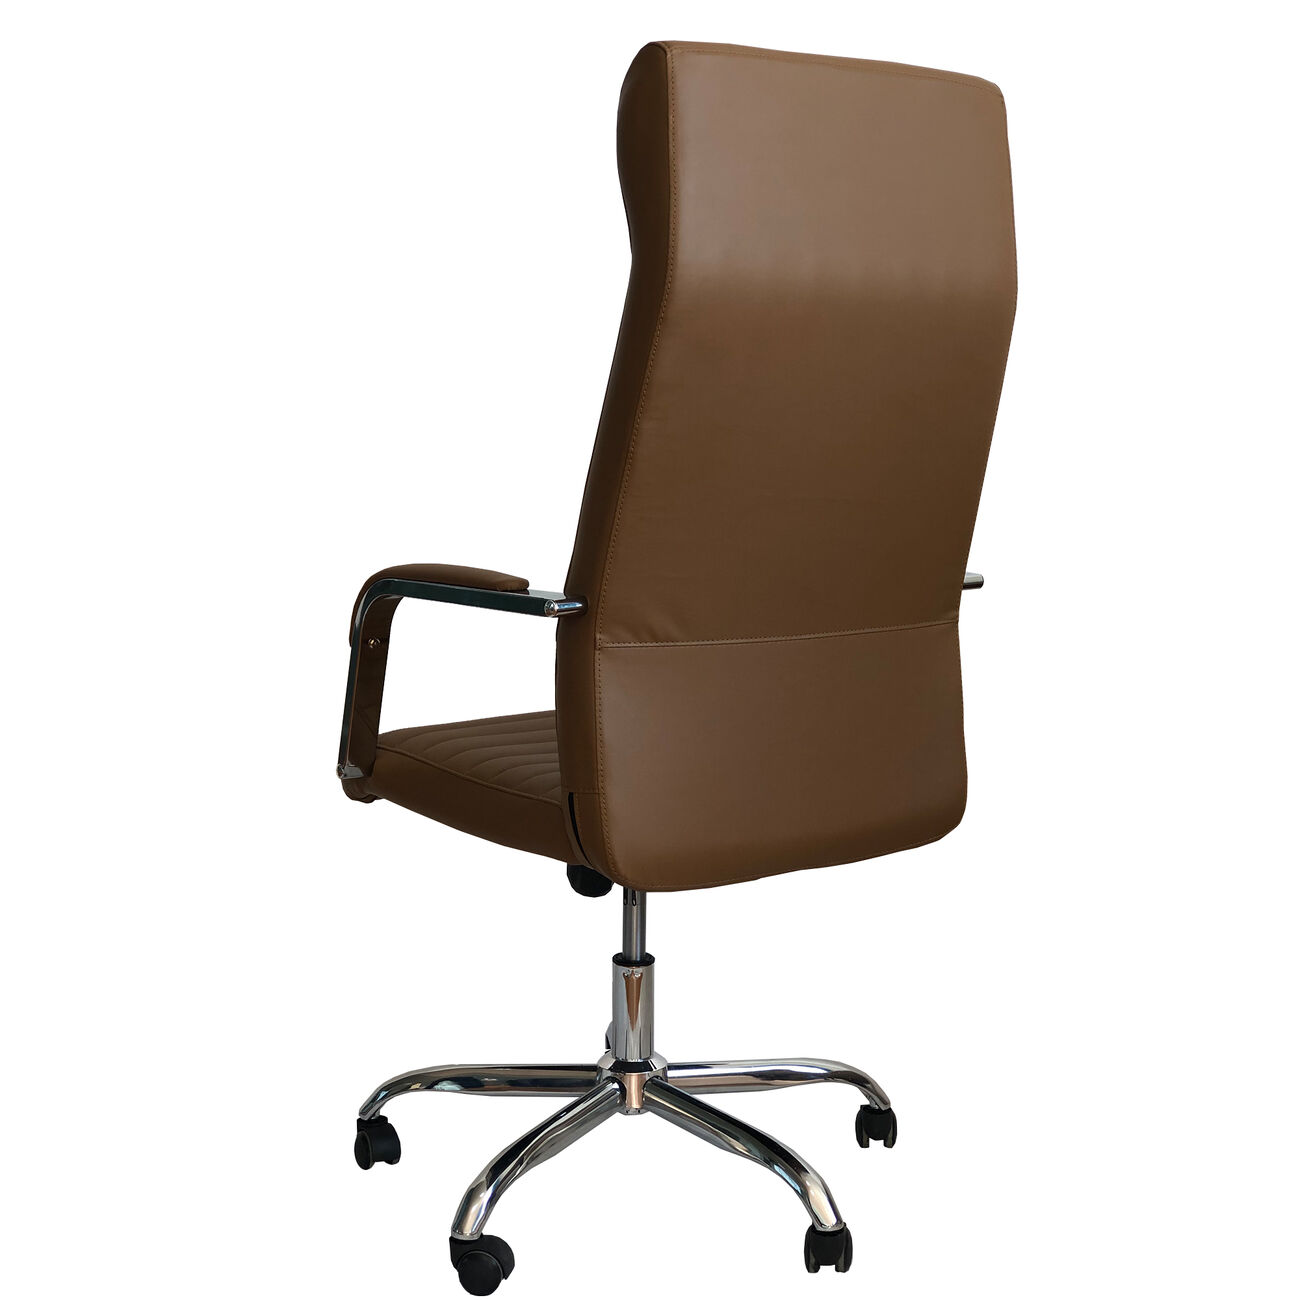 Adjustable Horizontal Ribbed Ergonomic Leatherette Office Chair with Casters, Beige and Chrome